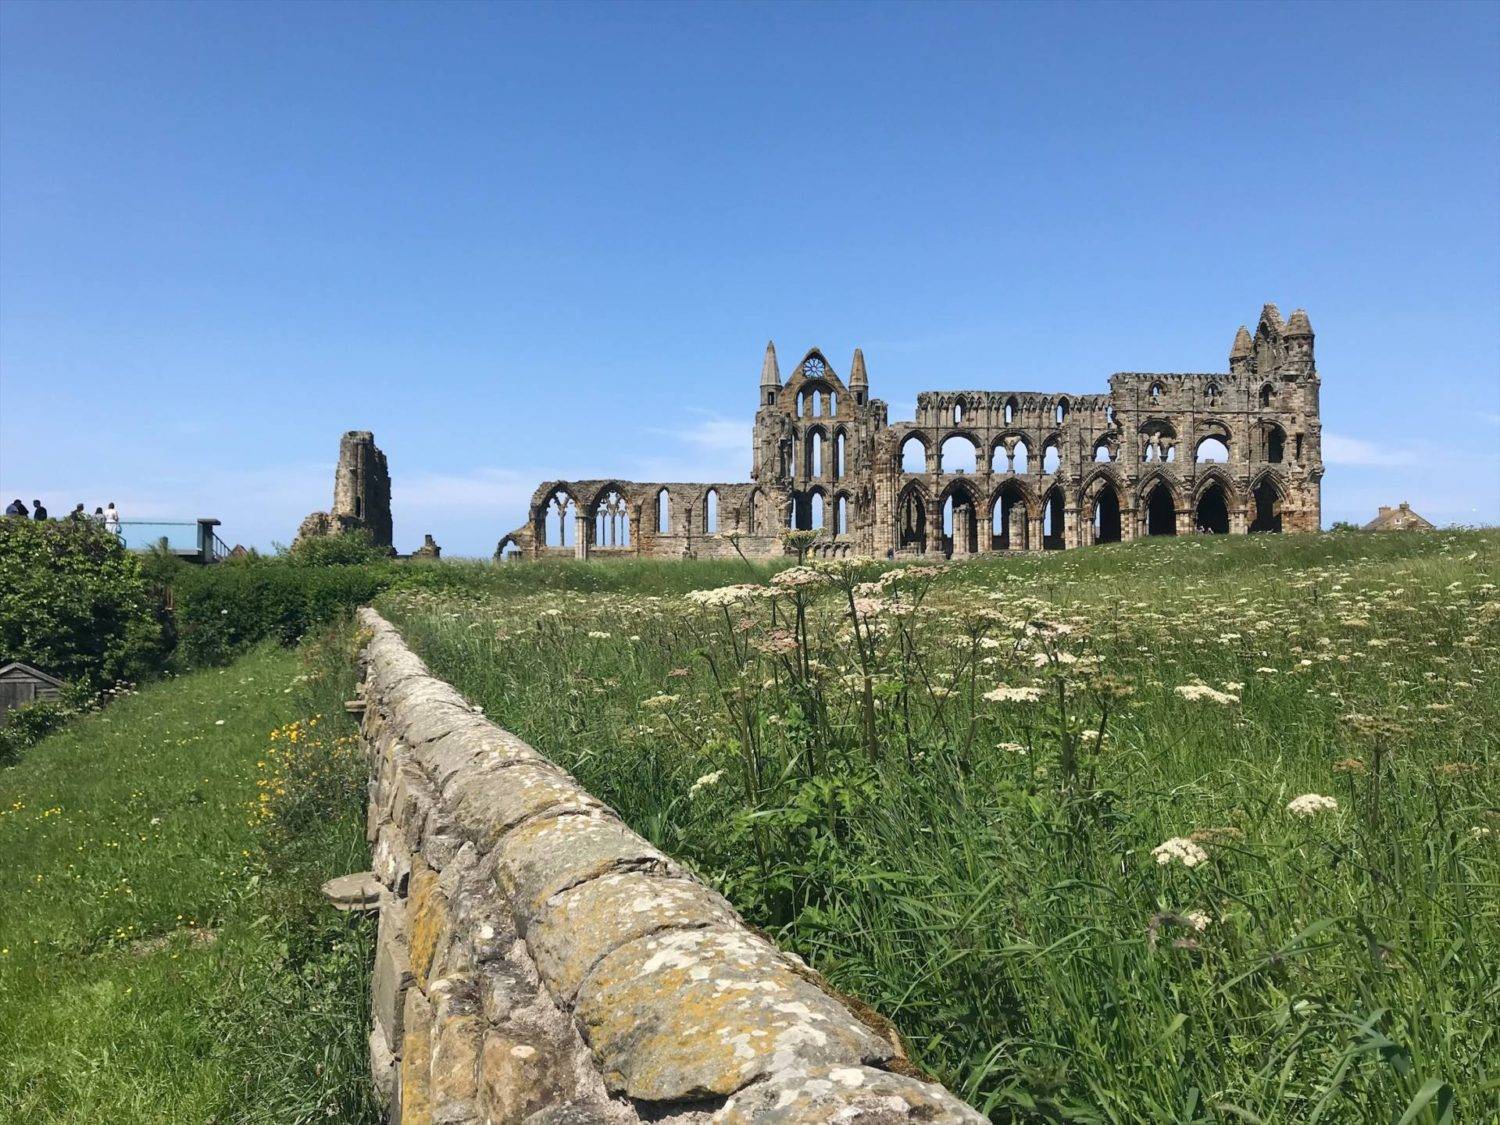 Whitby Abbey without paying